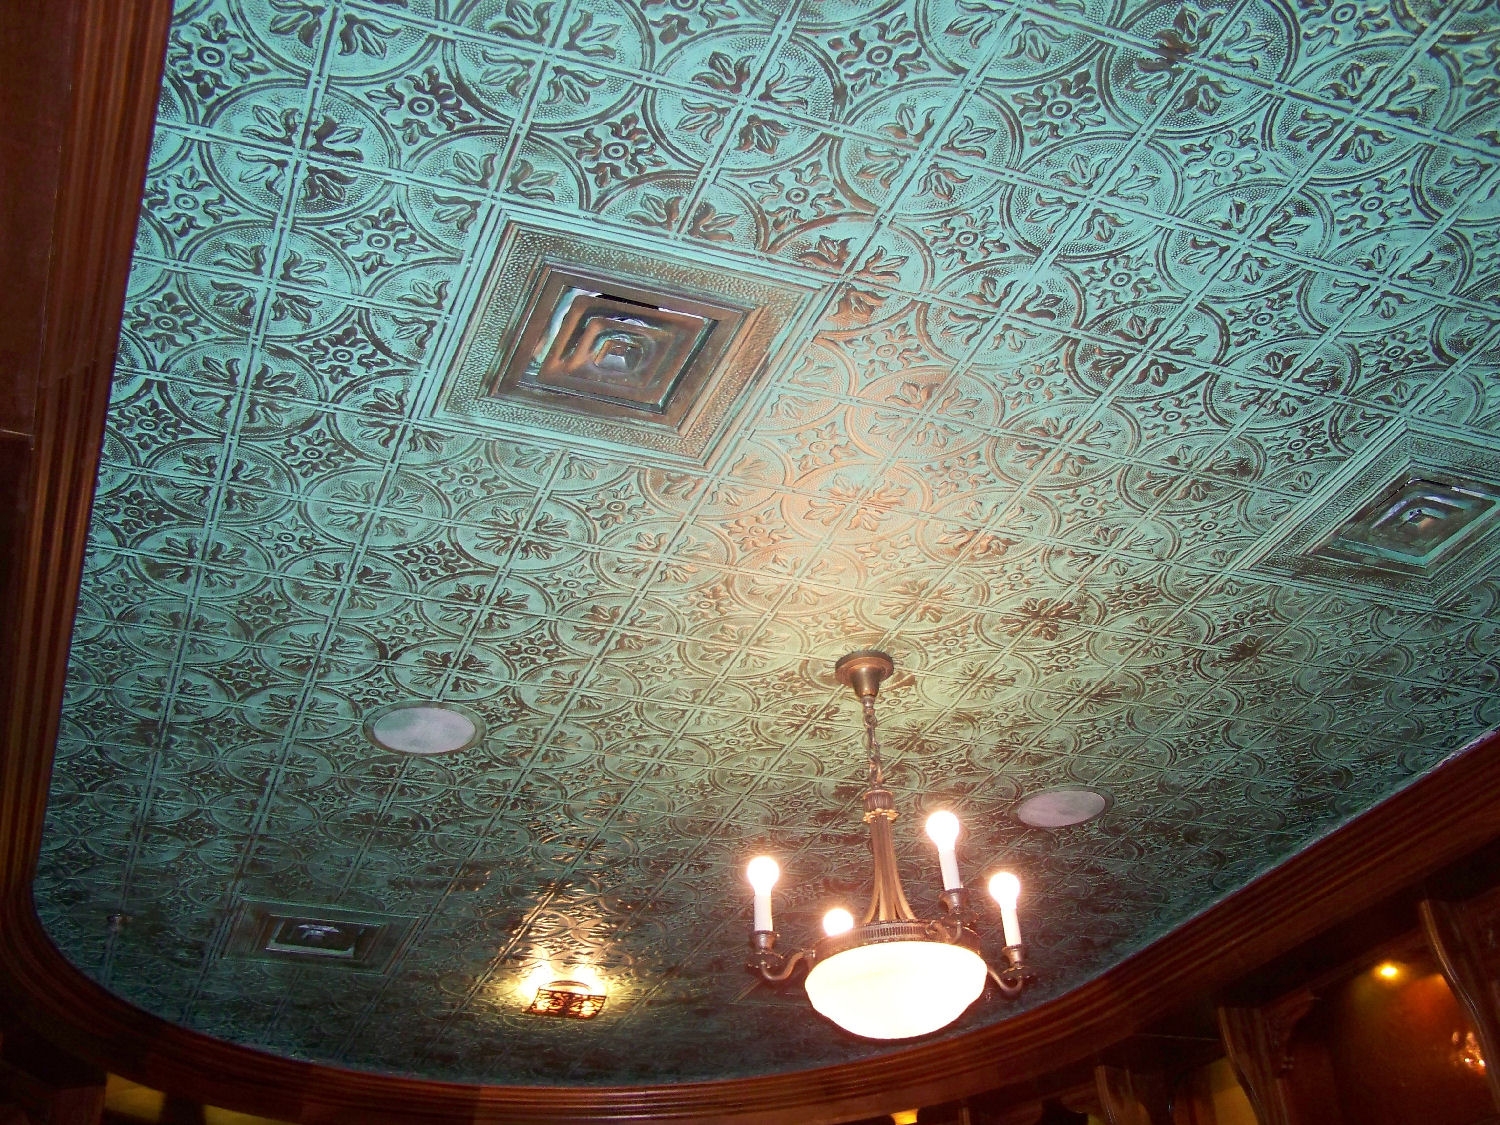 Stamped Tin Ceiling Tiles Stamped Tin Ceiling Tiles easy install tin ceiling tiles save money 1500 X 1125